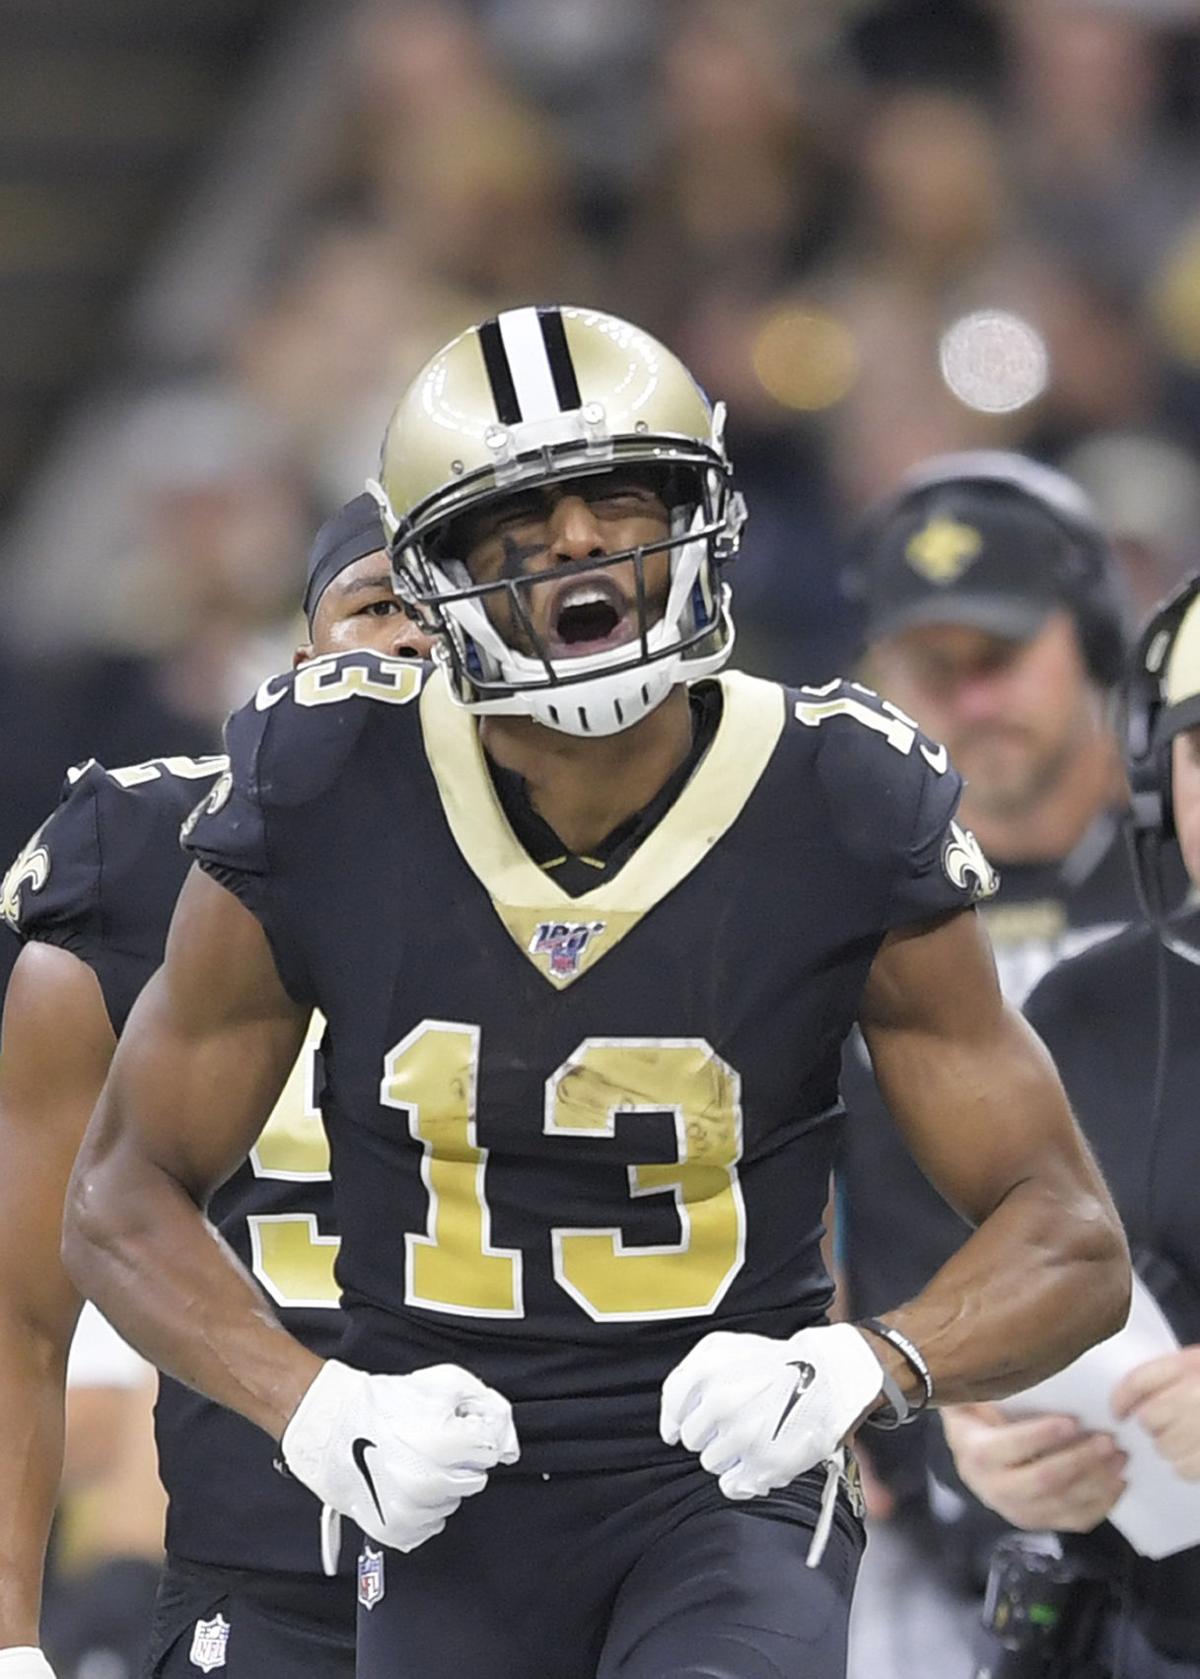 Michael Thomas sets new Saints record (again) for receptions in a